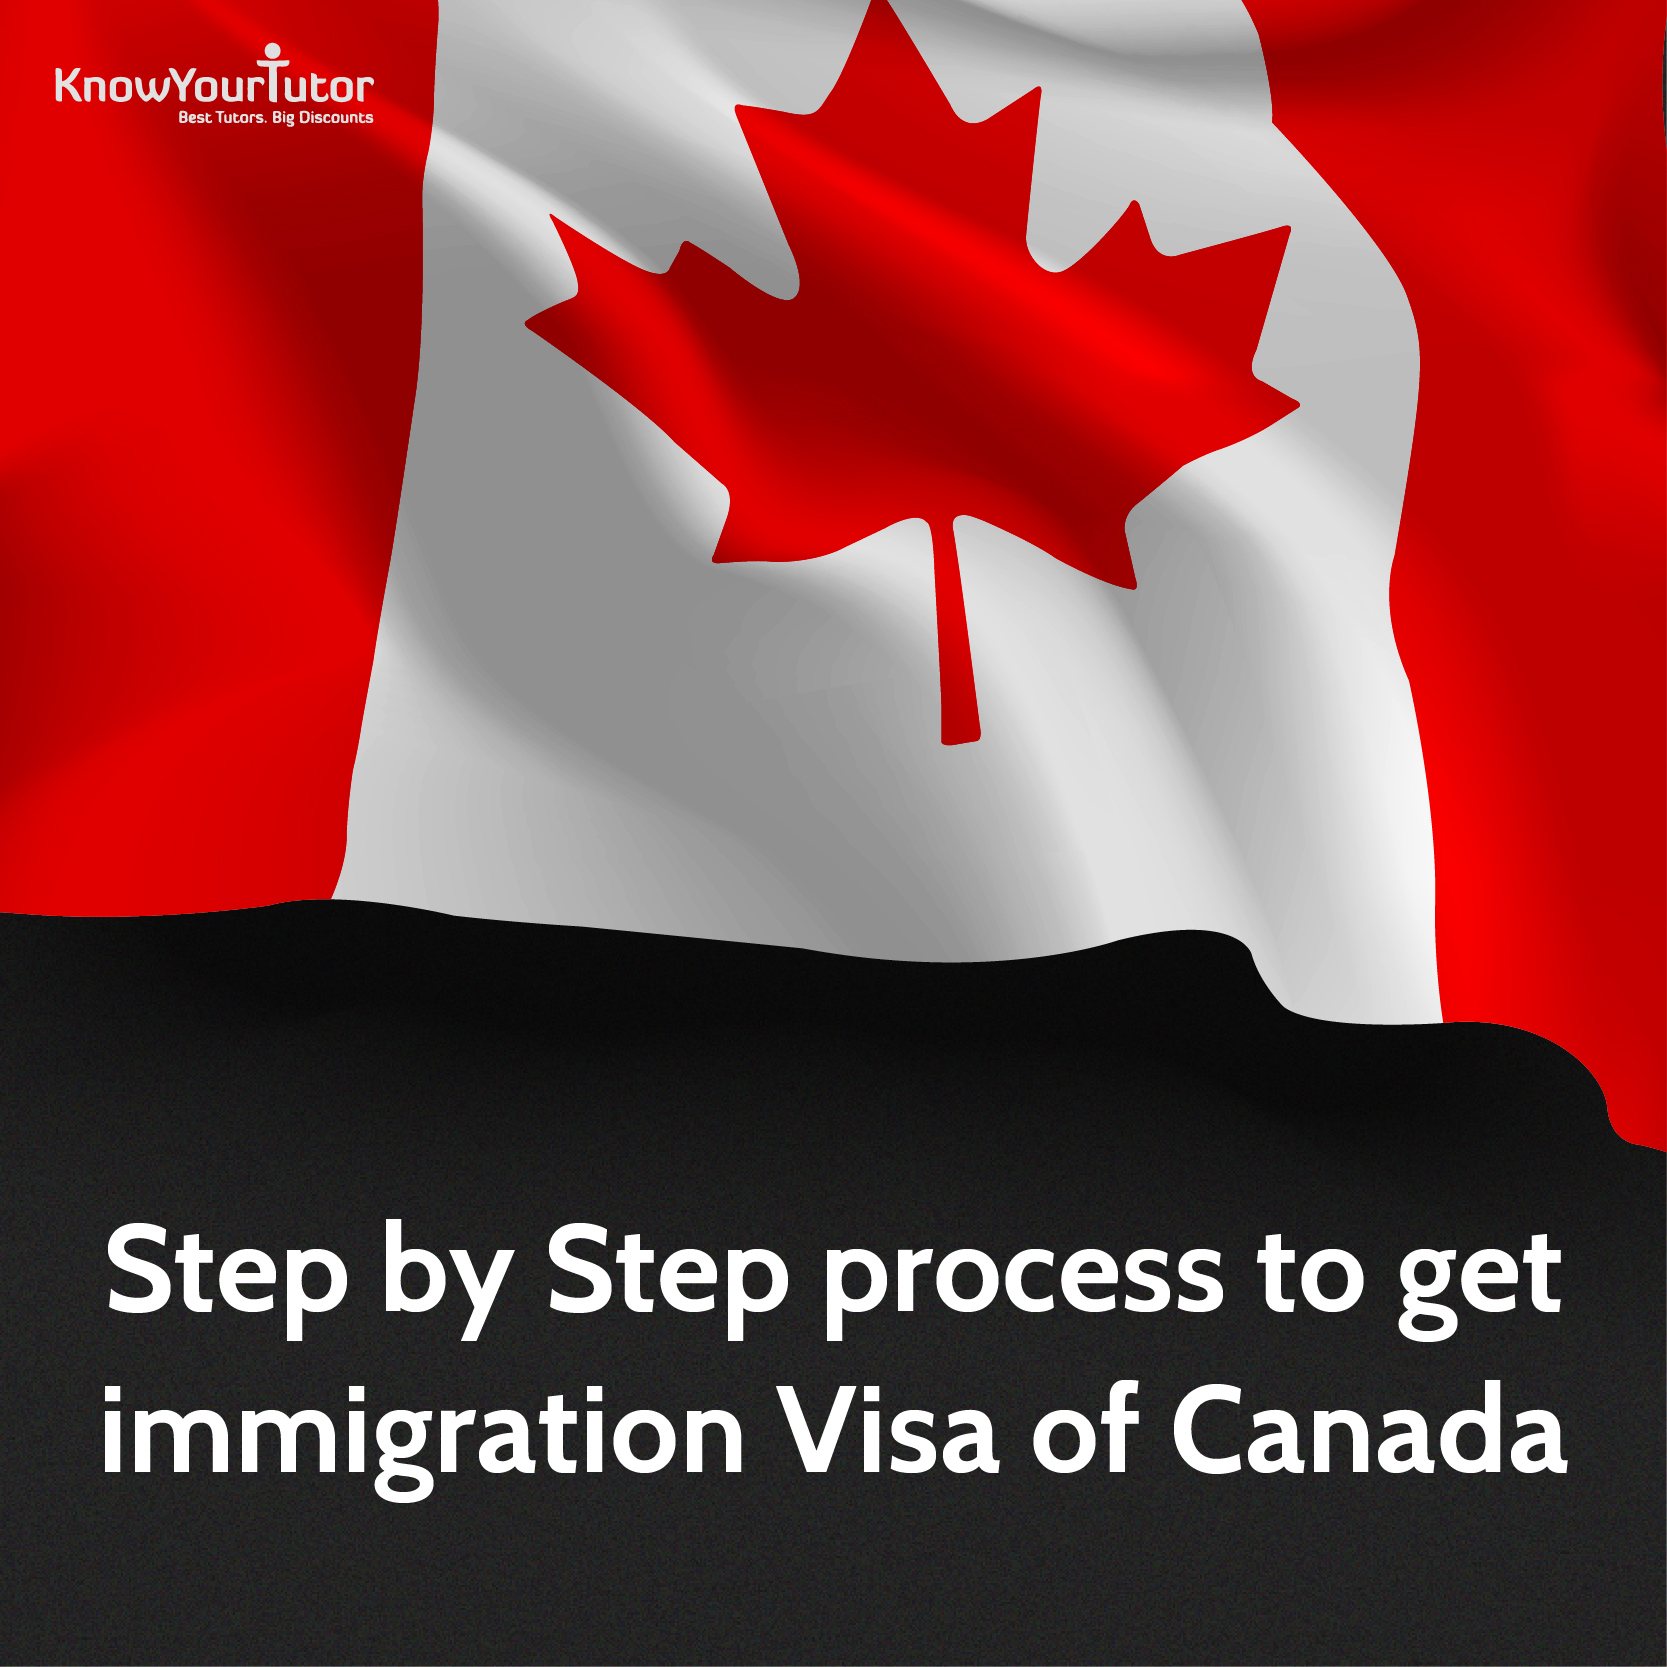 Step by Step process to get immigration visa of Canada